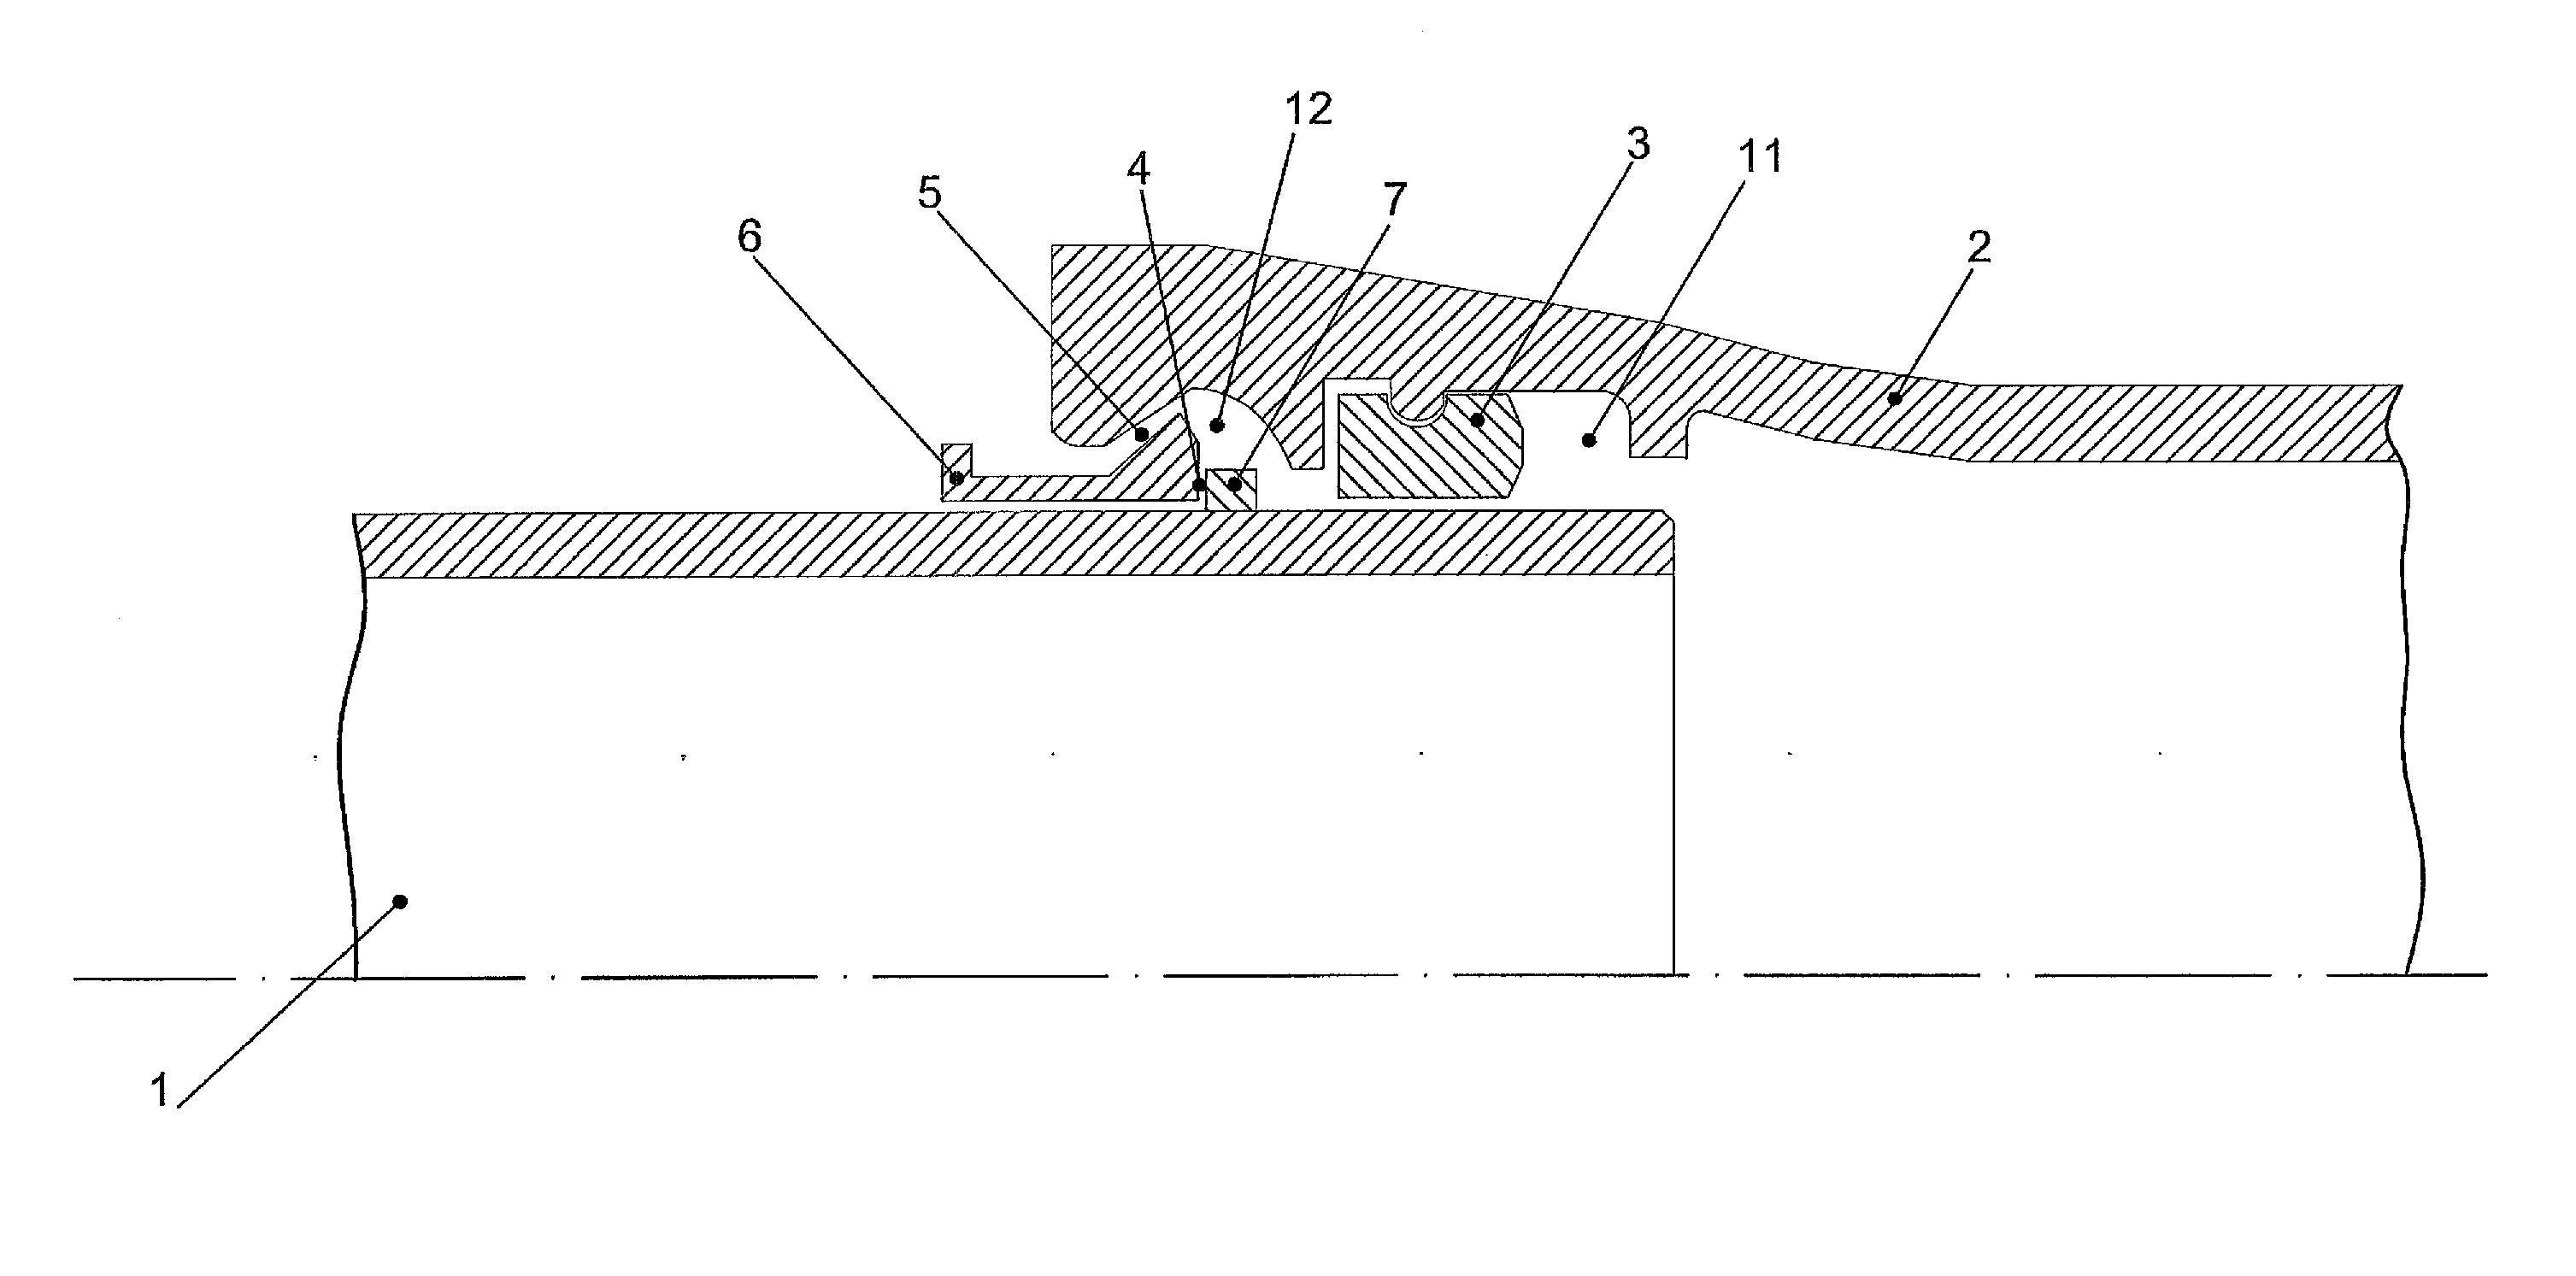 Bolt-type coupling system for pipes